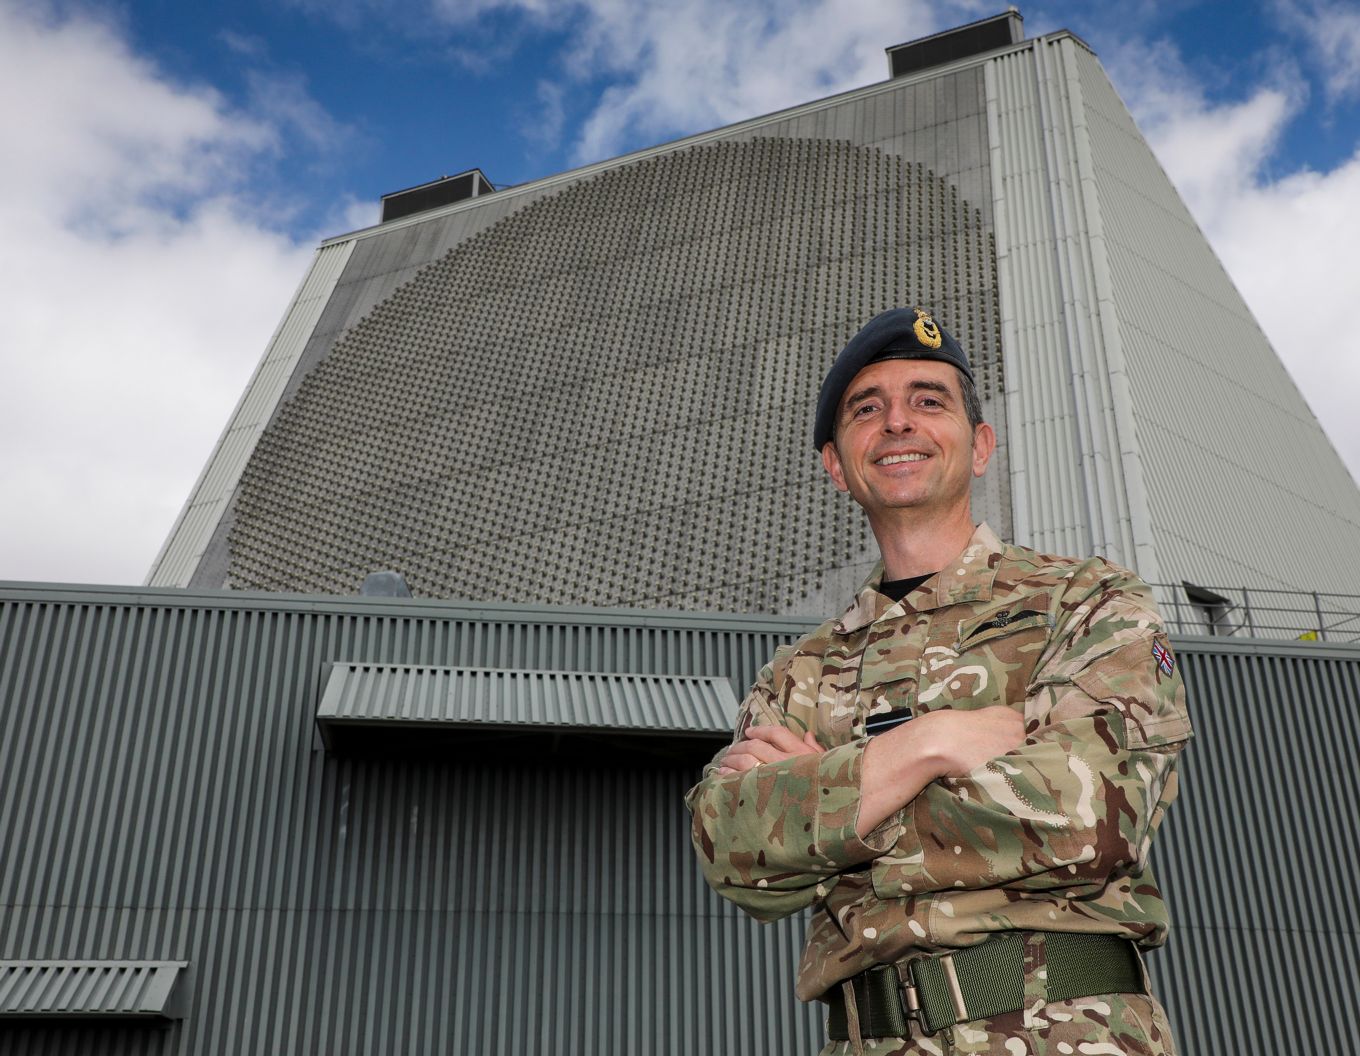 Air Vice-Marshal Godfrey smiling with arms folded outside RAF Fylingdales.